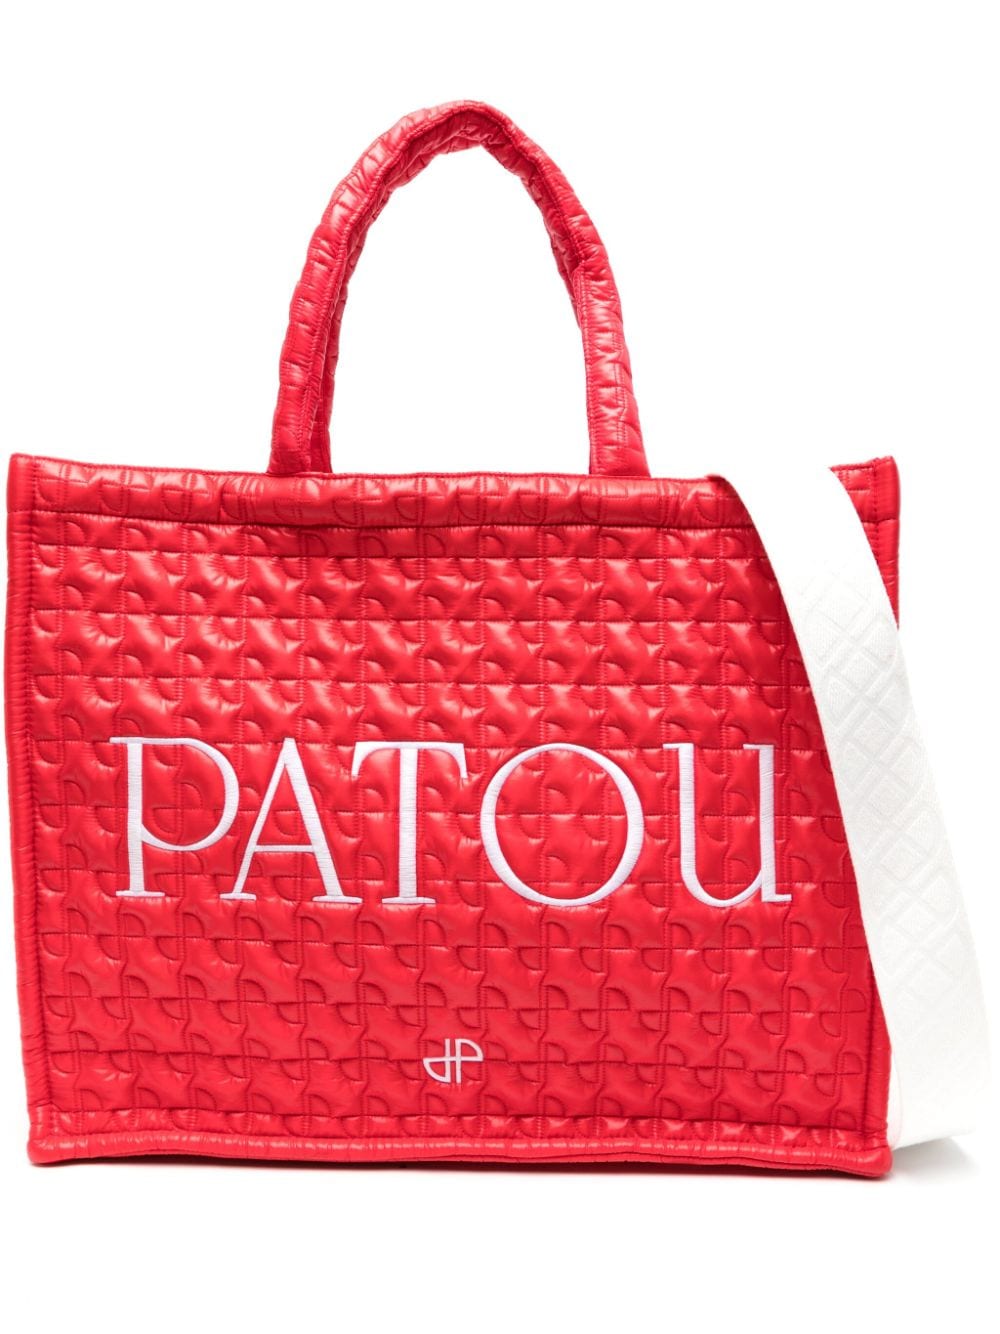 Patou large Patou quilted tote bag - Red von Patou